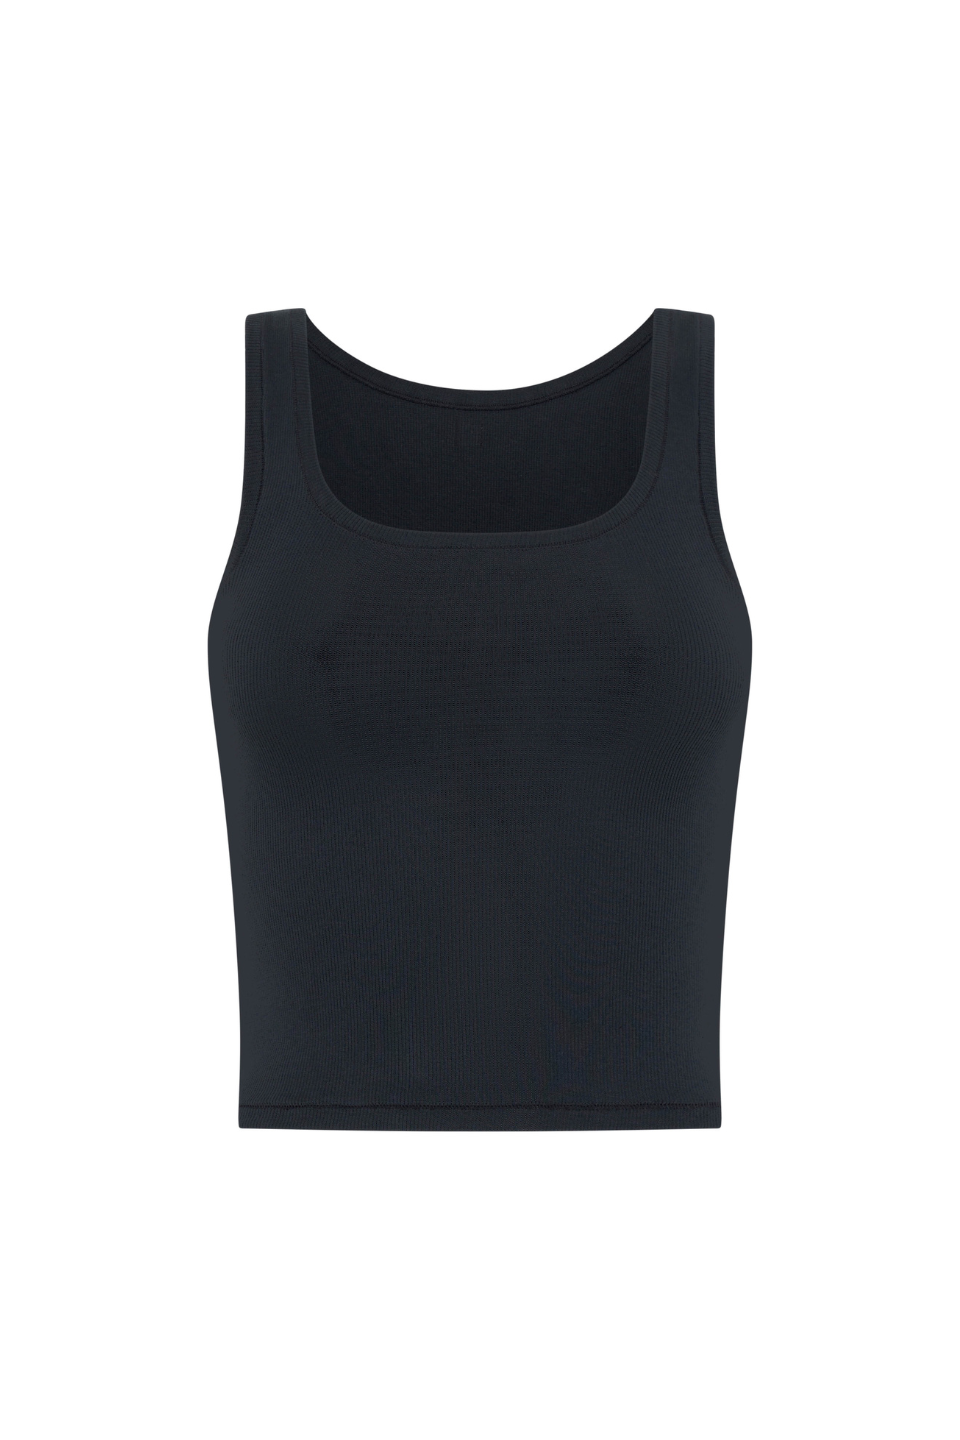 The Ribbed Tank, Bras - First Thing Underwear